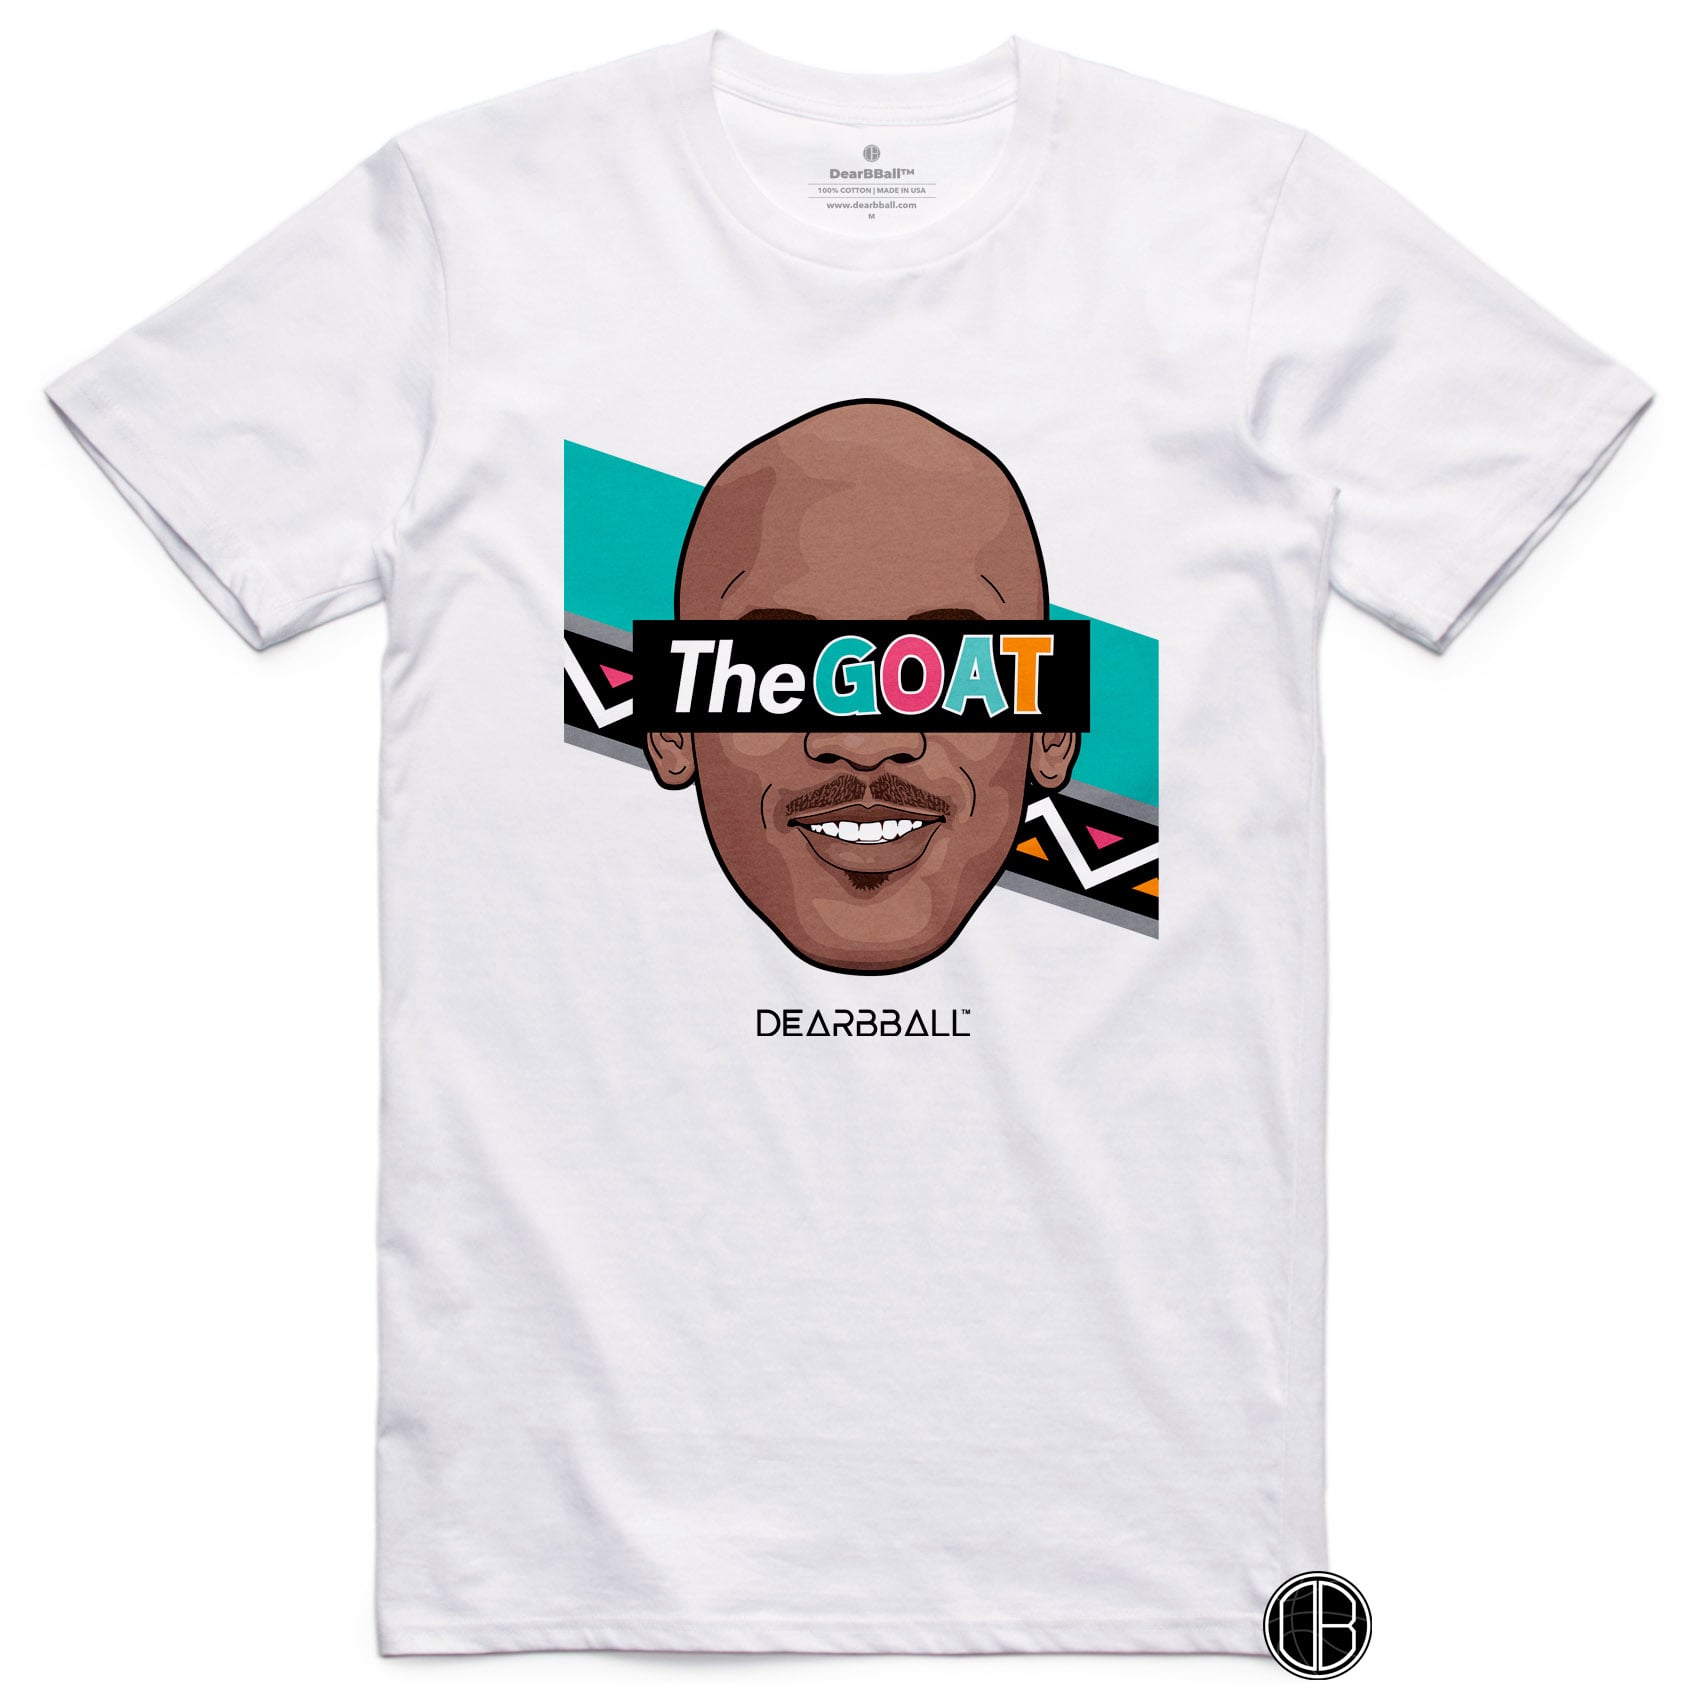 [Enfant] DearBBall T-Shirt - The GOAT All Star Game Edition